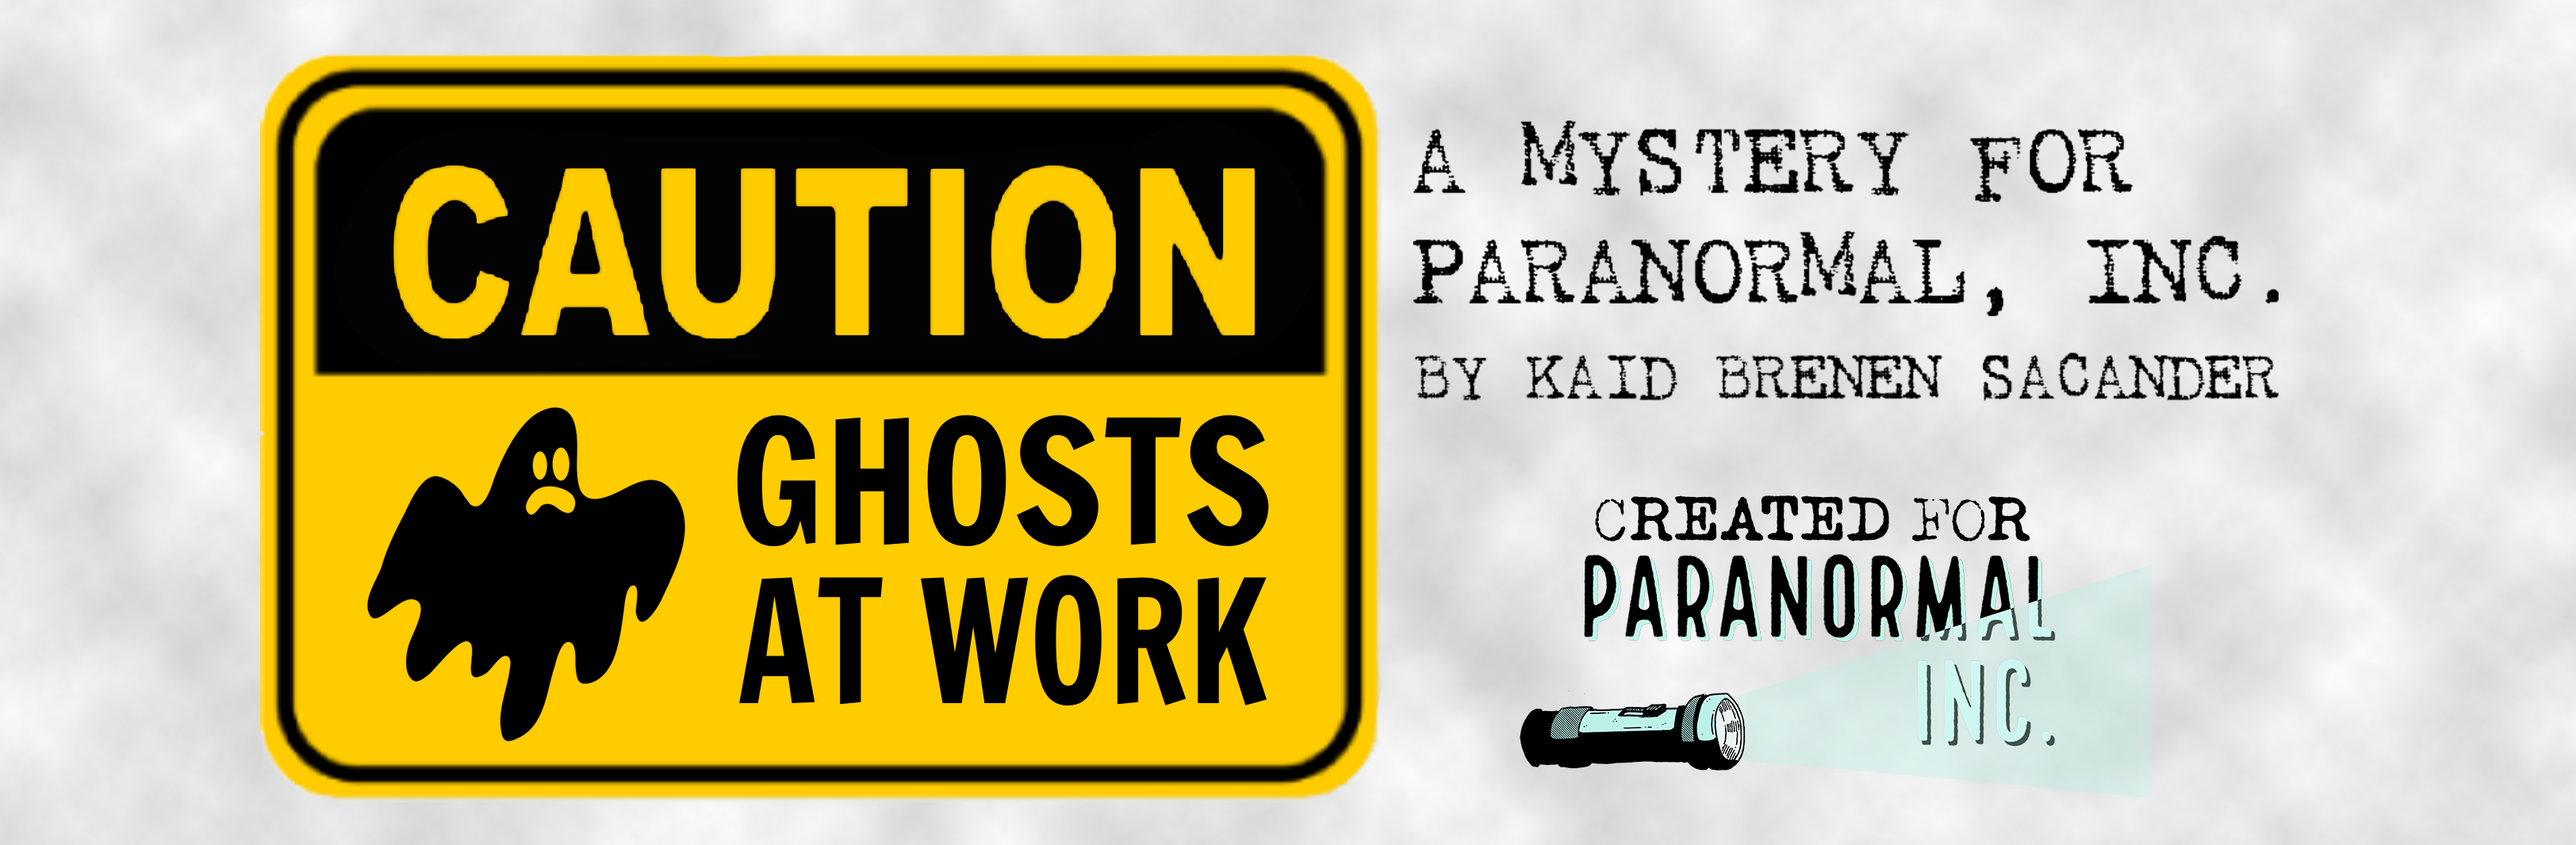 Caution: Ghosts at Work